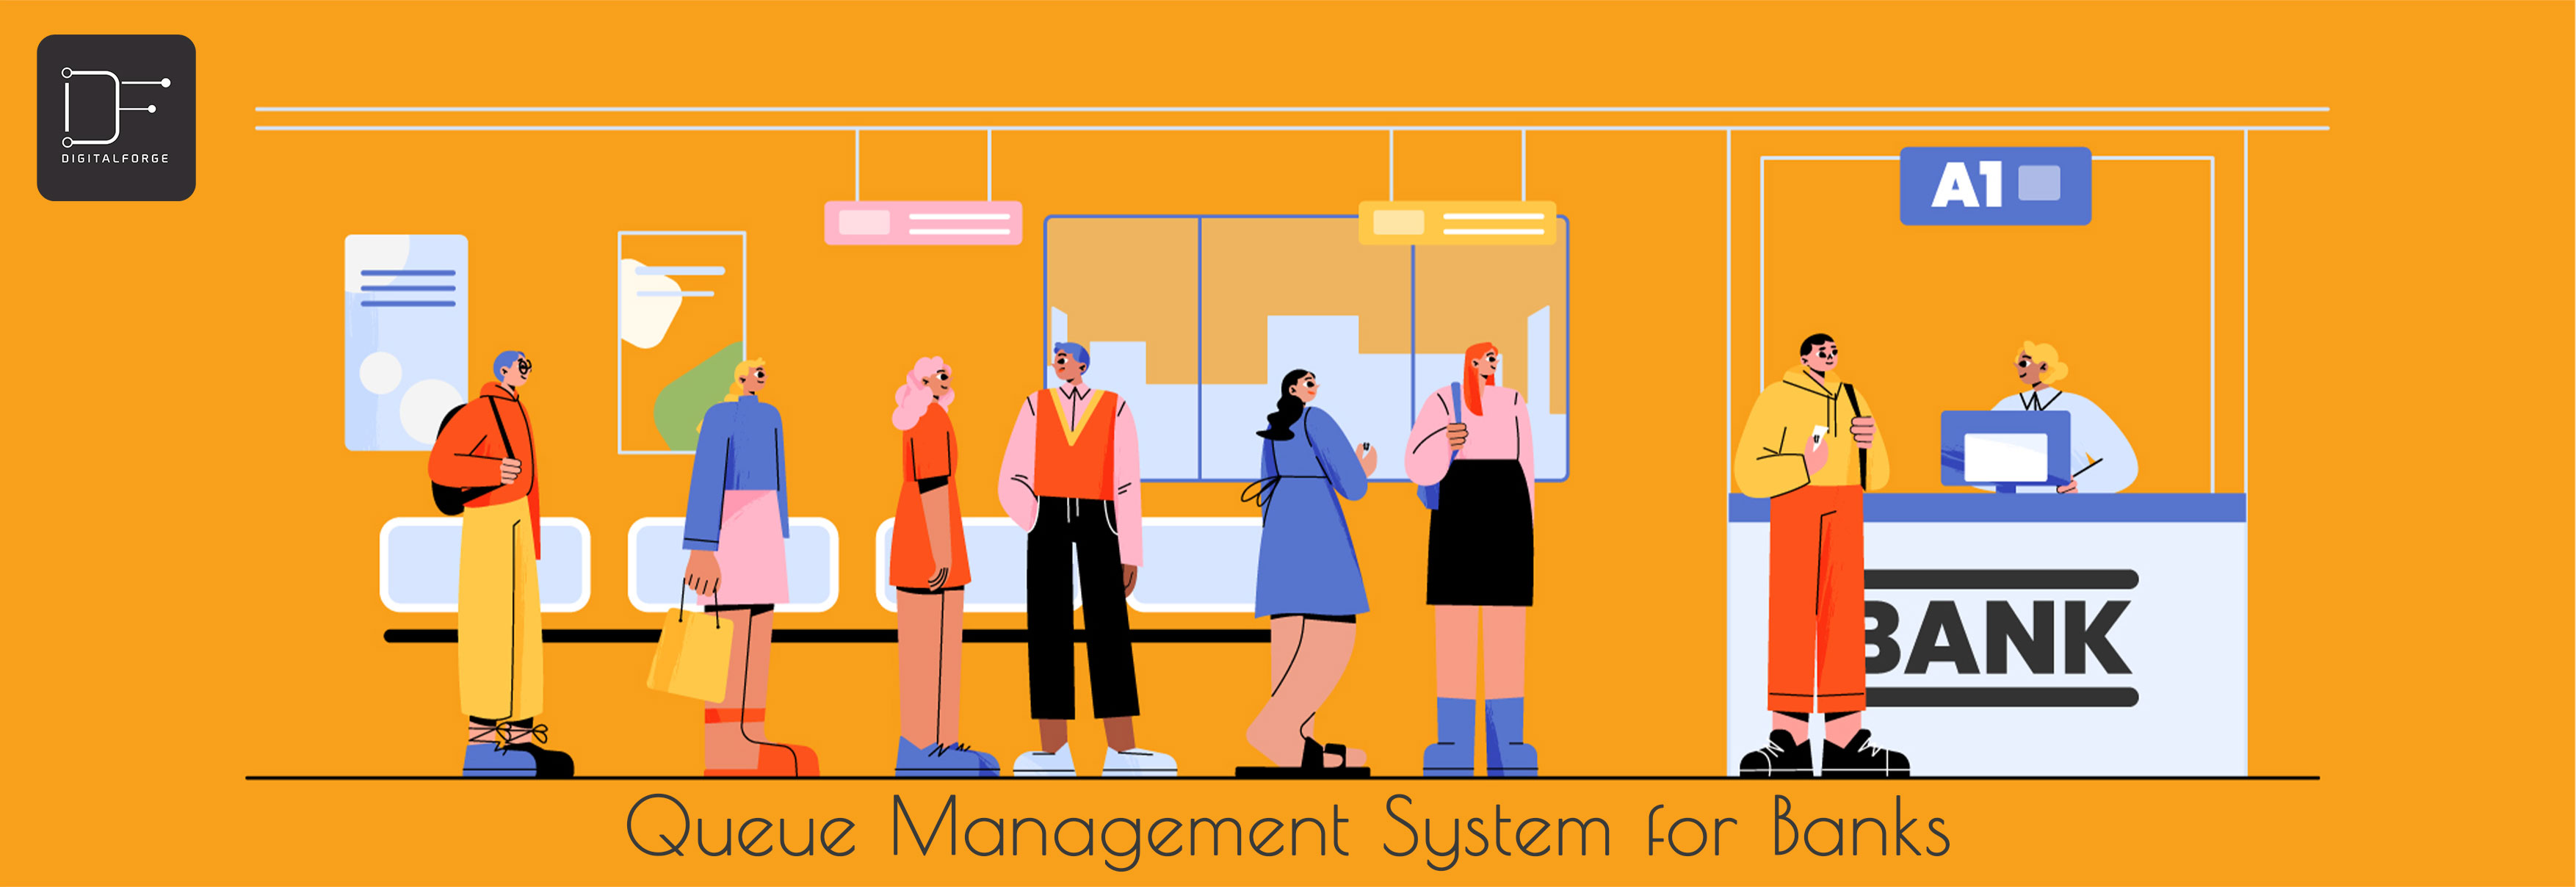 A Queue Management System for Banks and Financial Institutes to Streamline Banking Operations